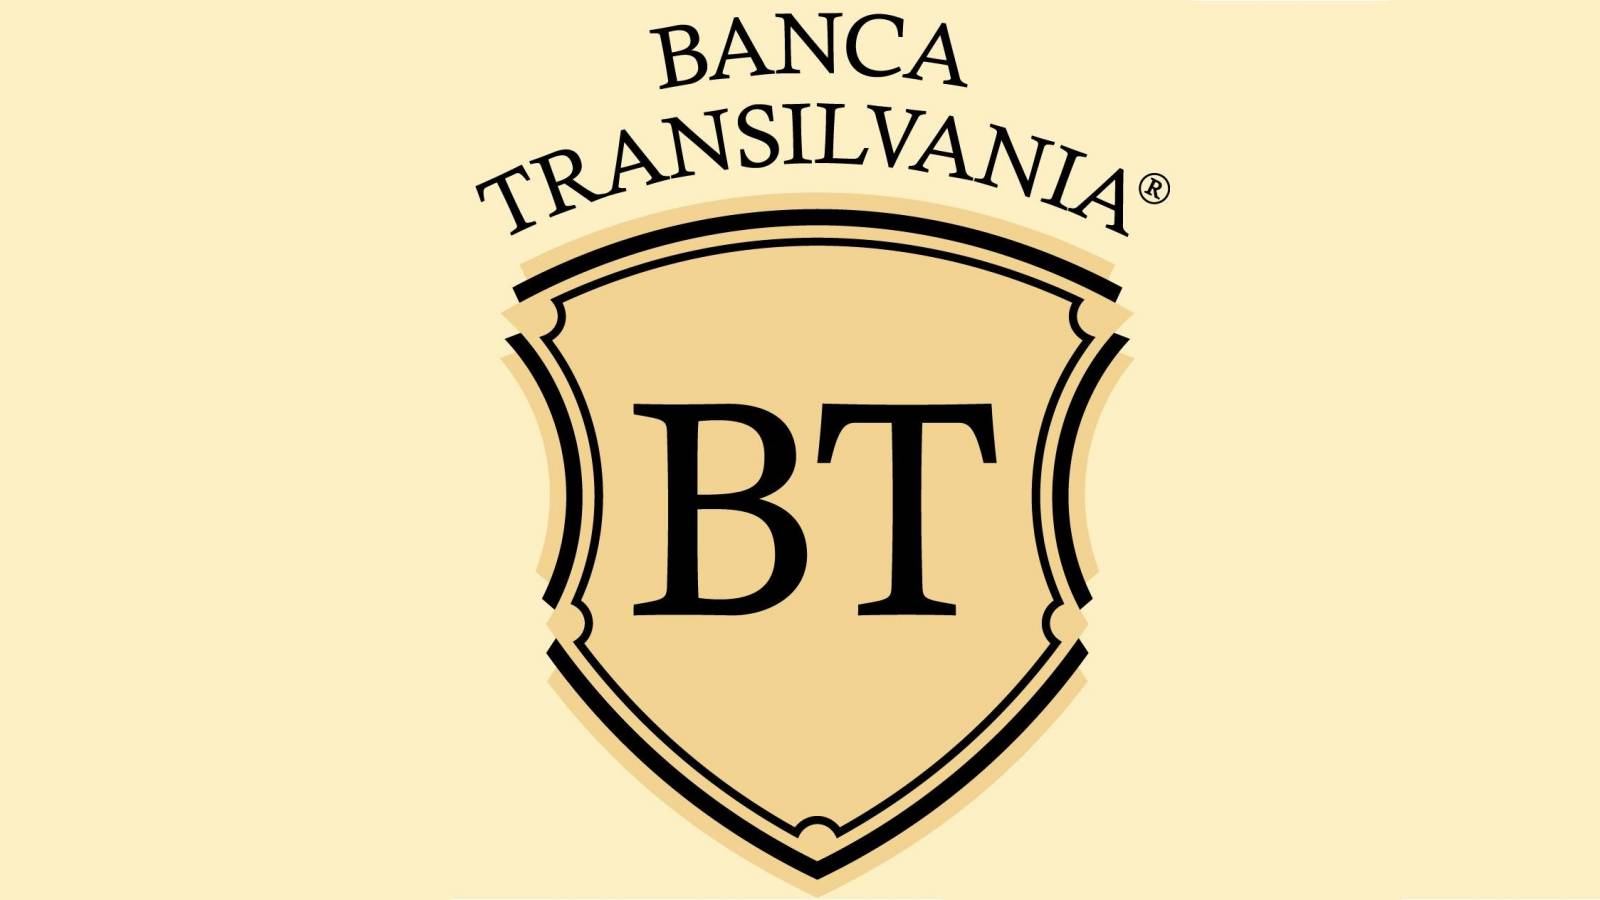 PREMIERE BANCA Transilvania Officially Announced to All Romanian Customers